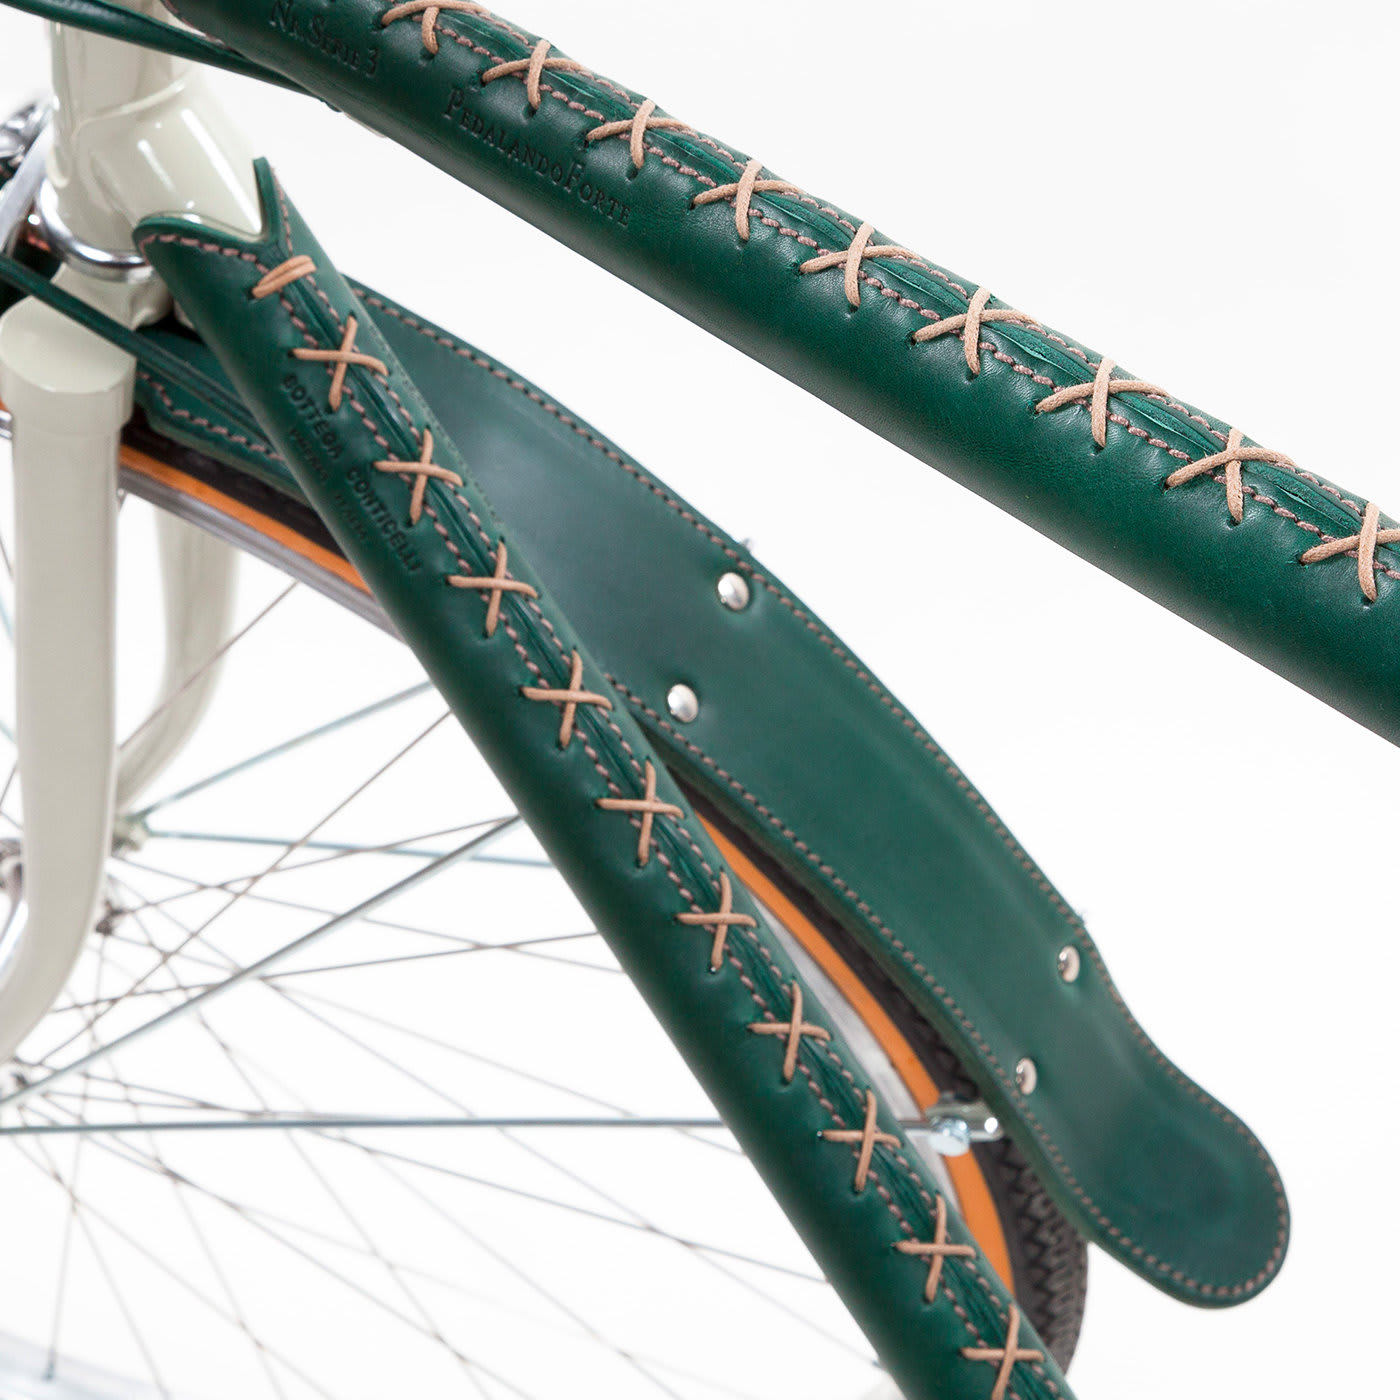 Men's Leather- Covered Bicycle Tobacco and Green - Bottega Conticelli